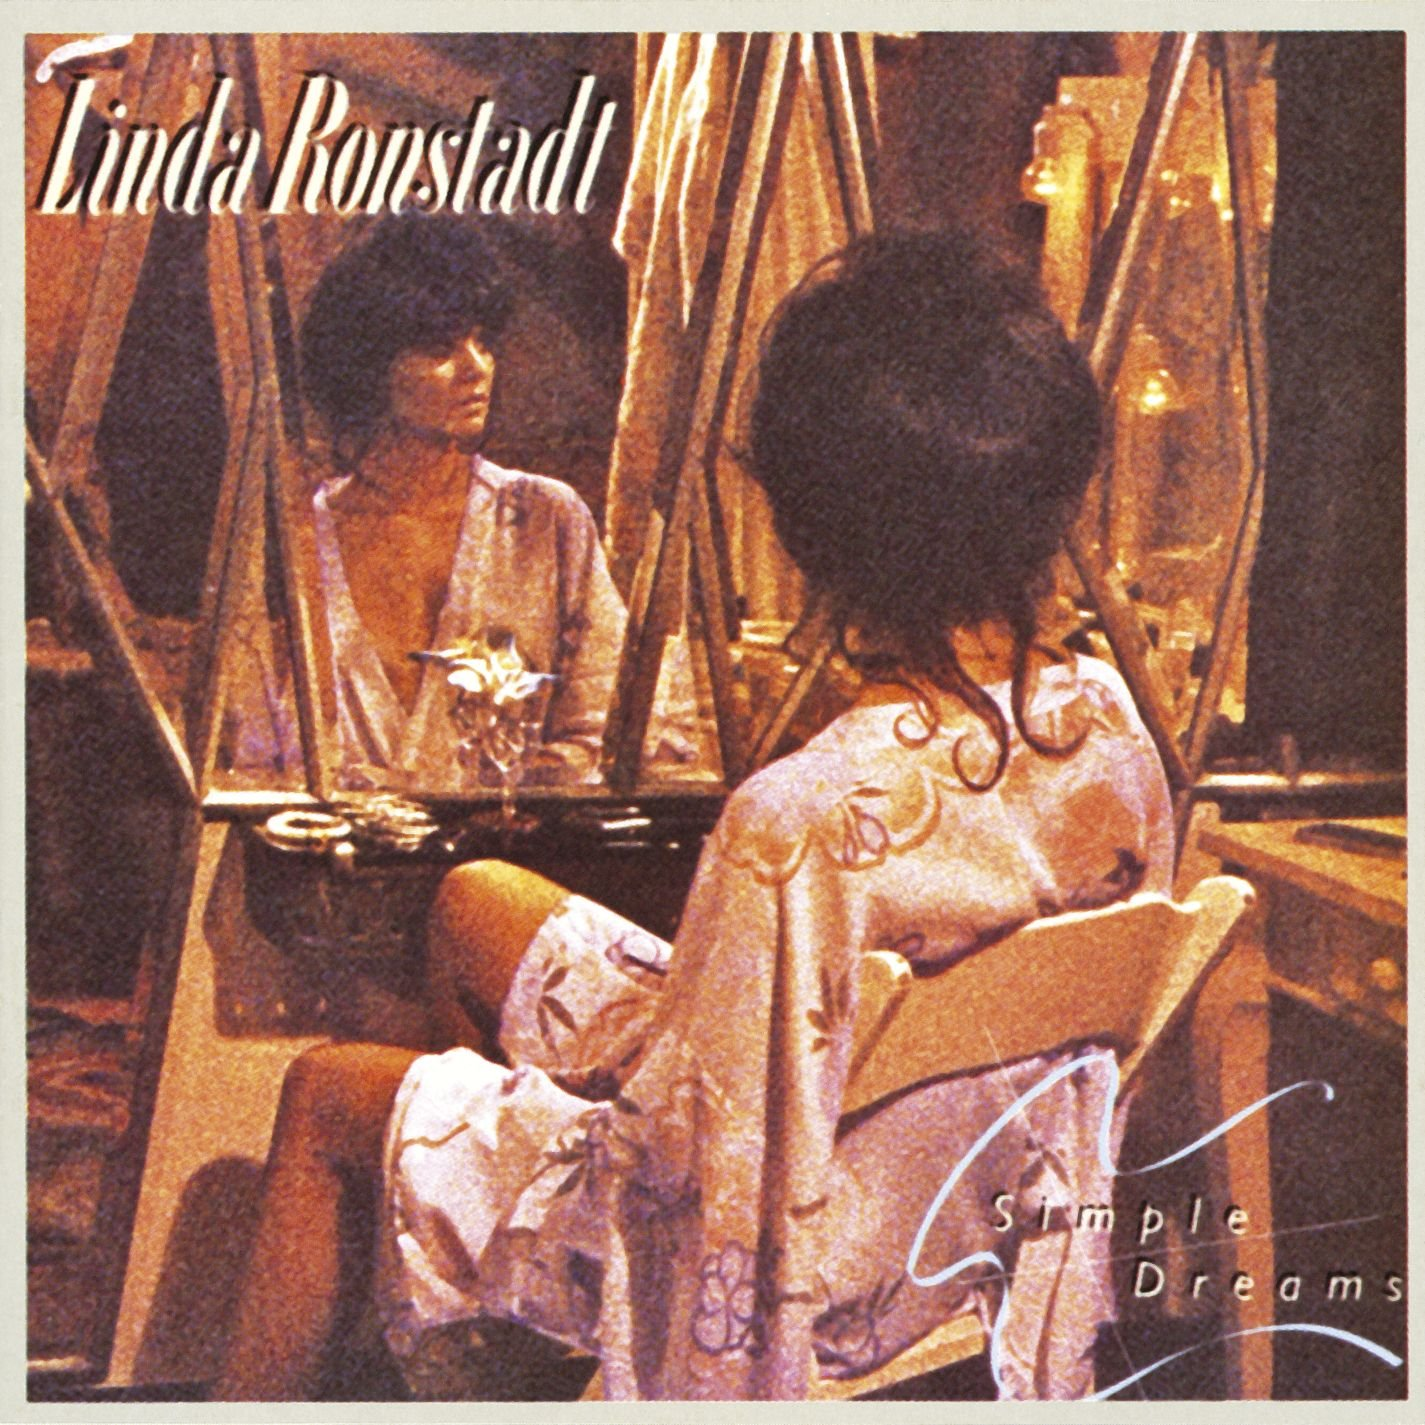 Art for It's So Easy (Clean) by Linda Ronstadt